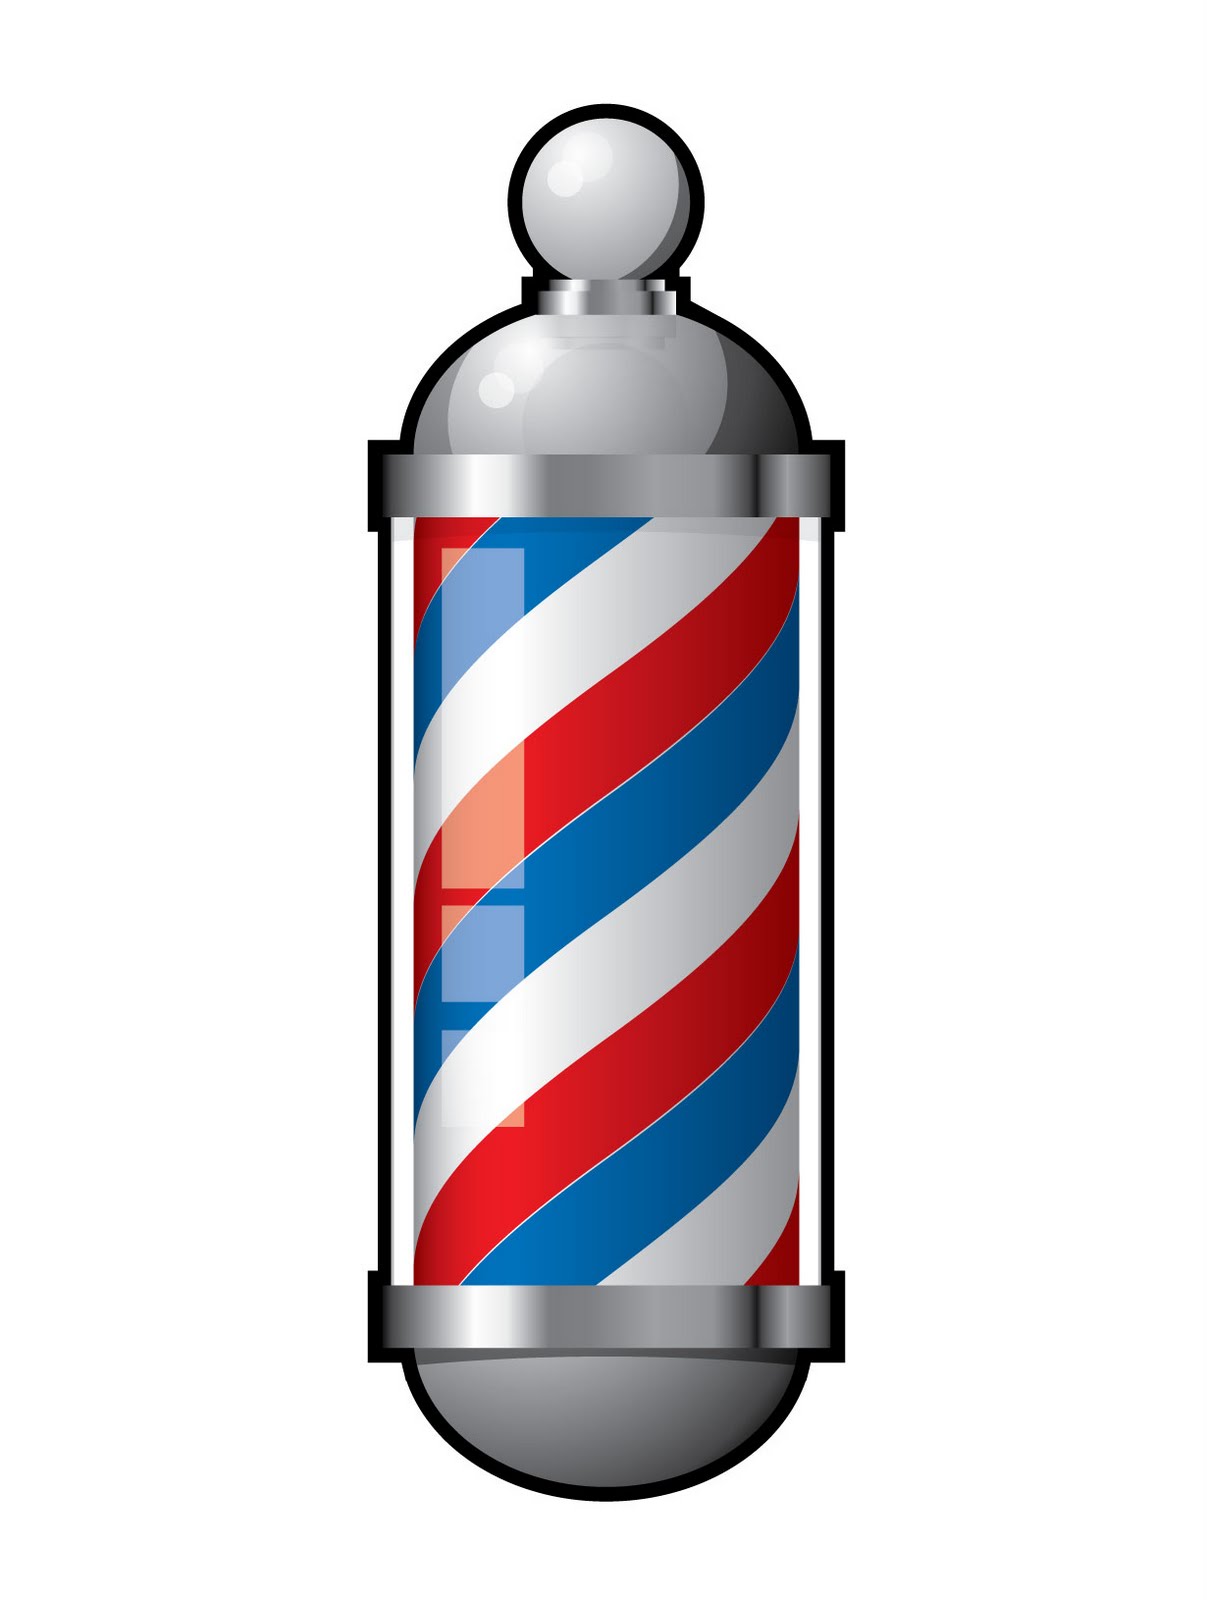 Barber Pole Vector   Clipart Best